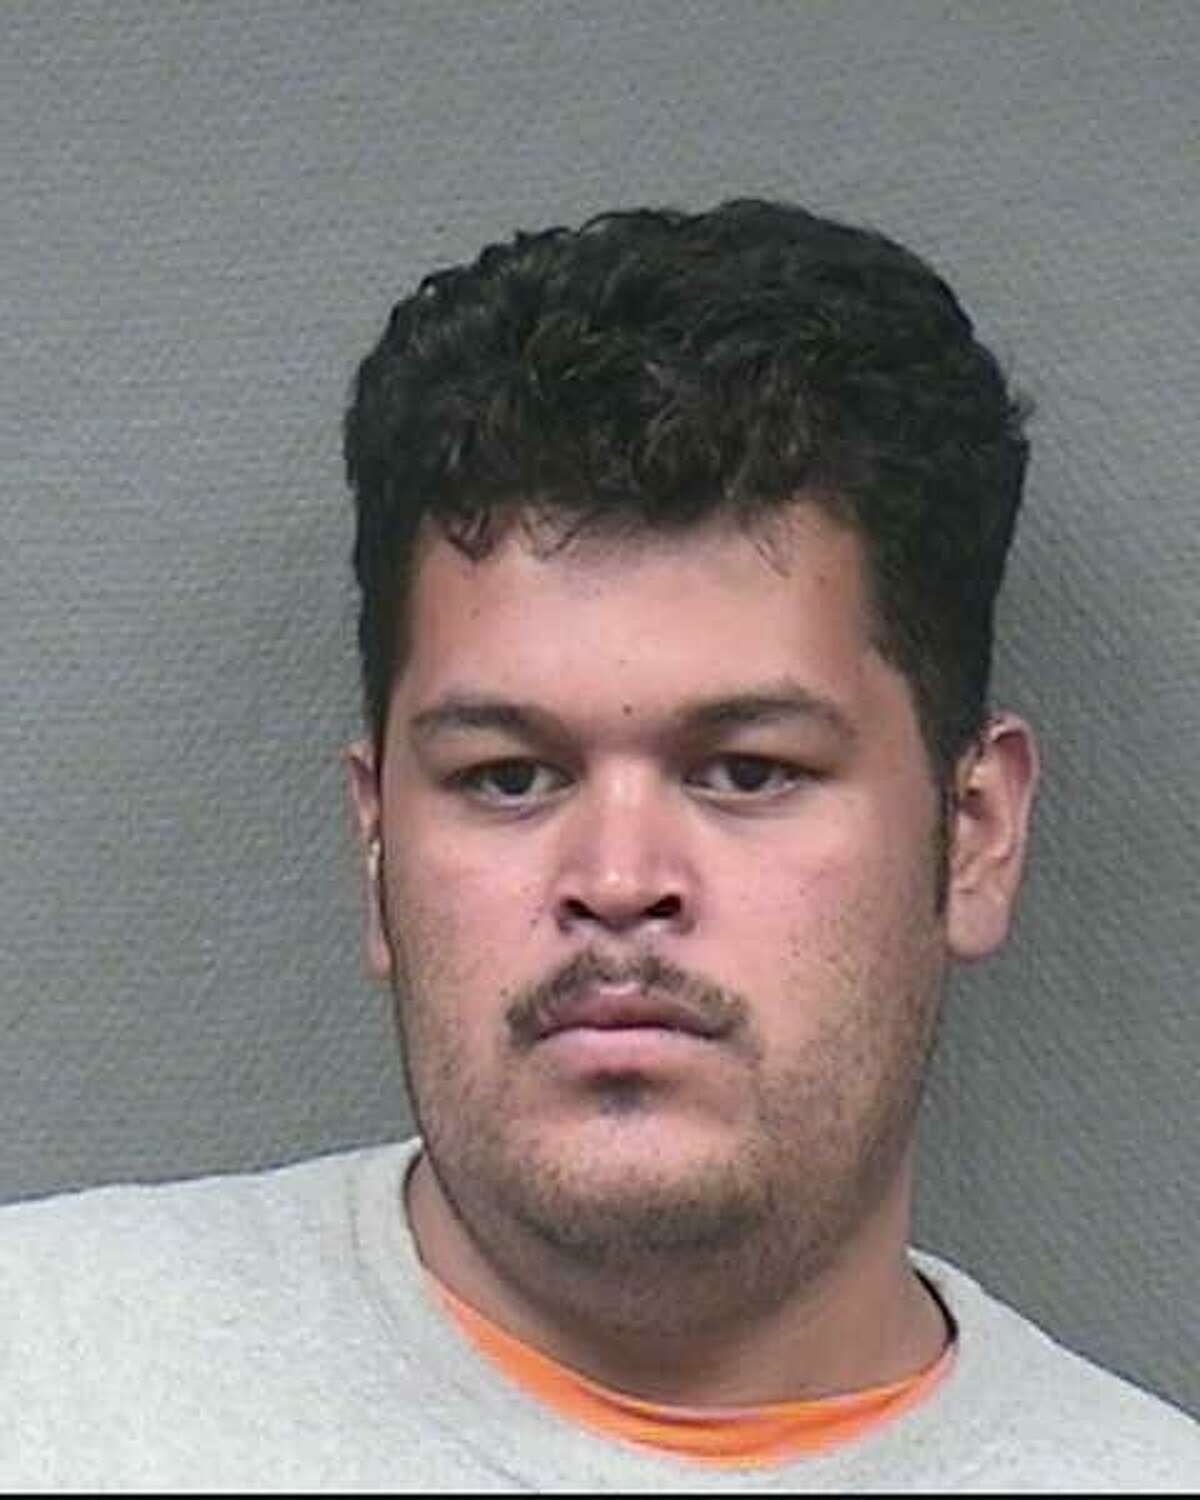 Francisco Castaneda, of Houston, is wanted by Houston Crime Stoppers on a charge of aggravated sexual assault.